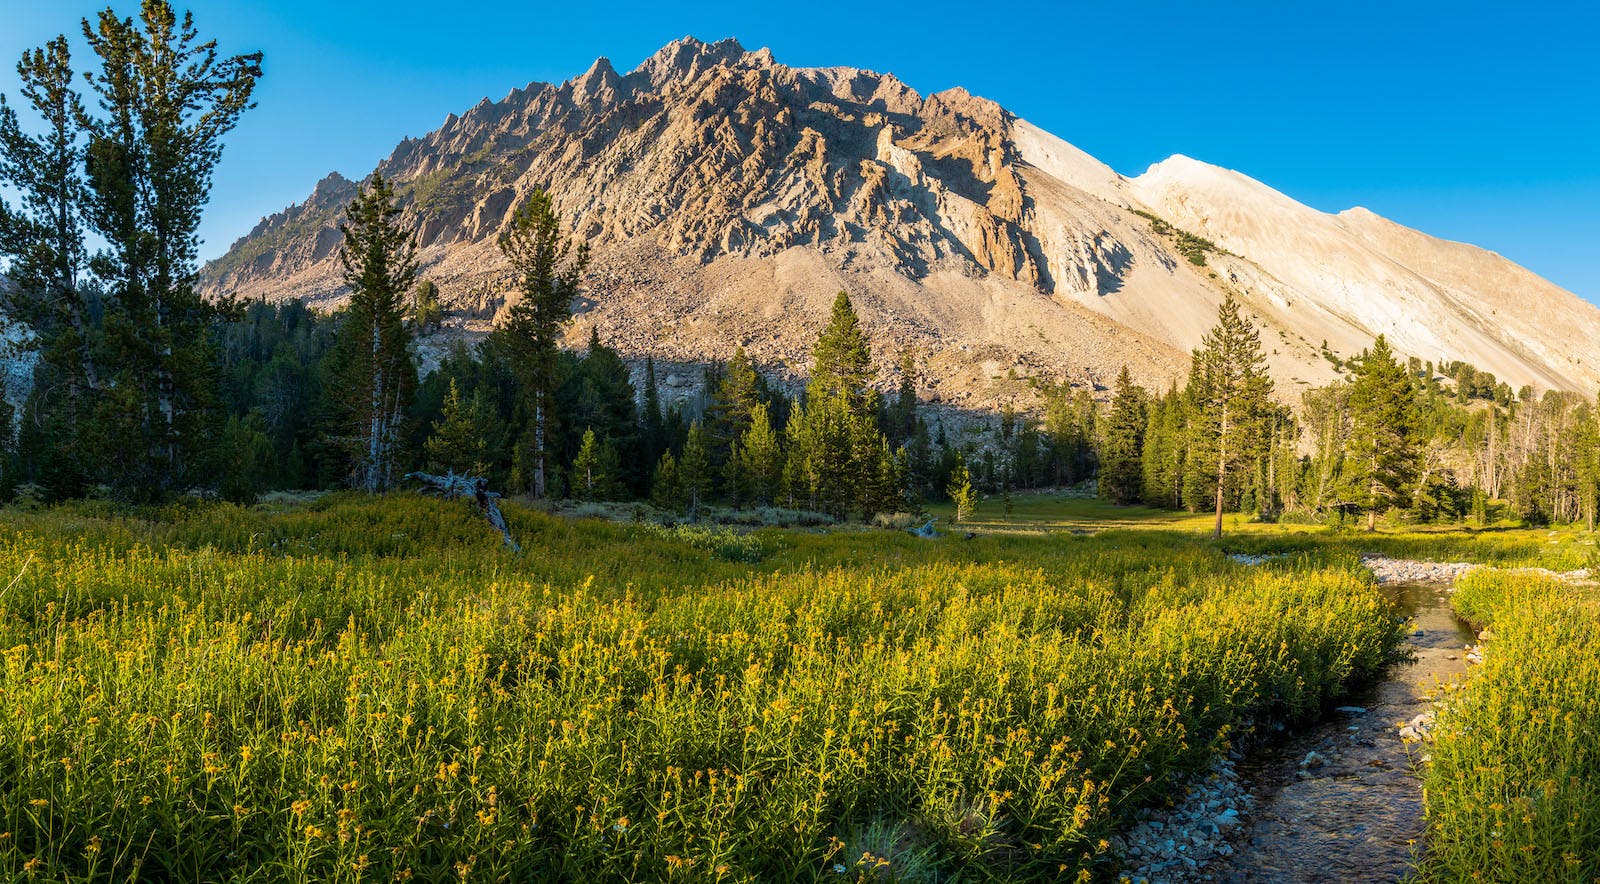 Castle Peak above an alpine meadow in Idaho's White Clouds Mountains